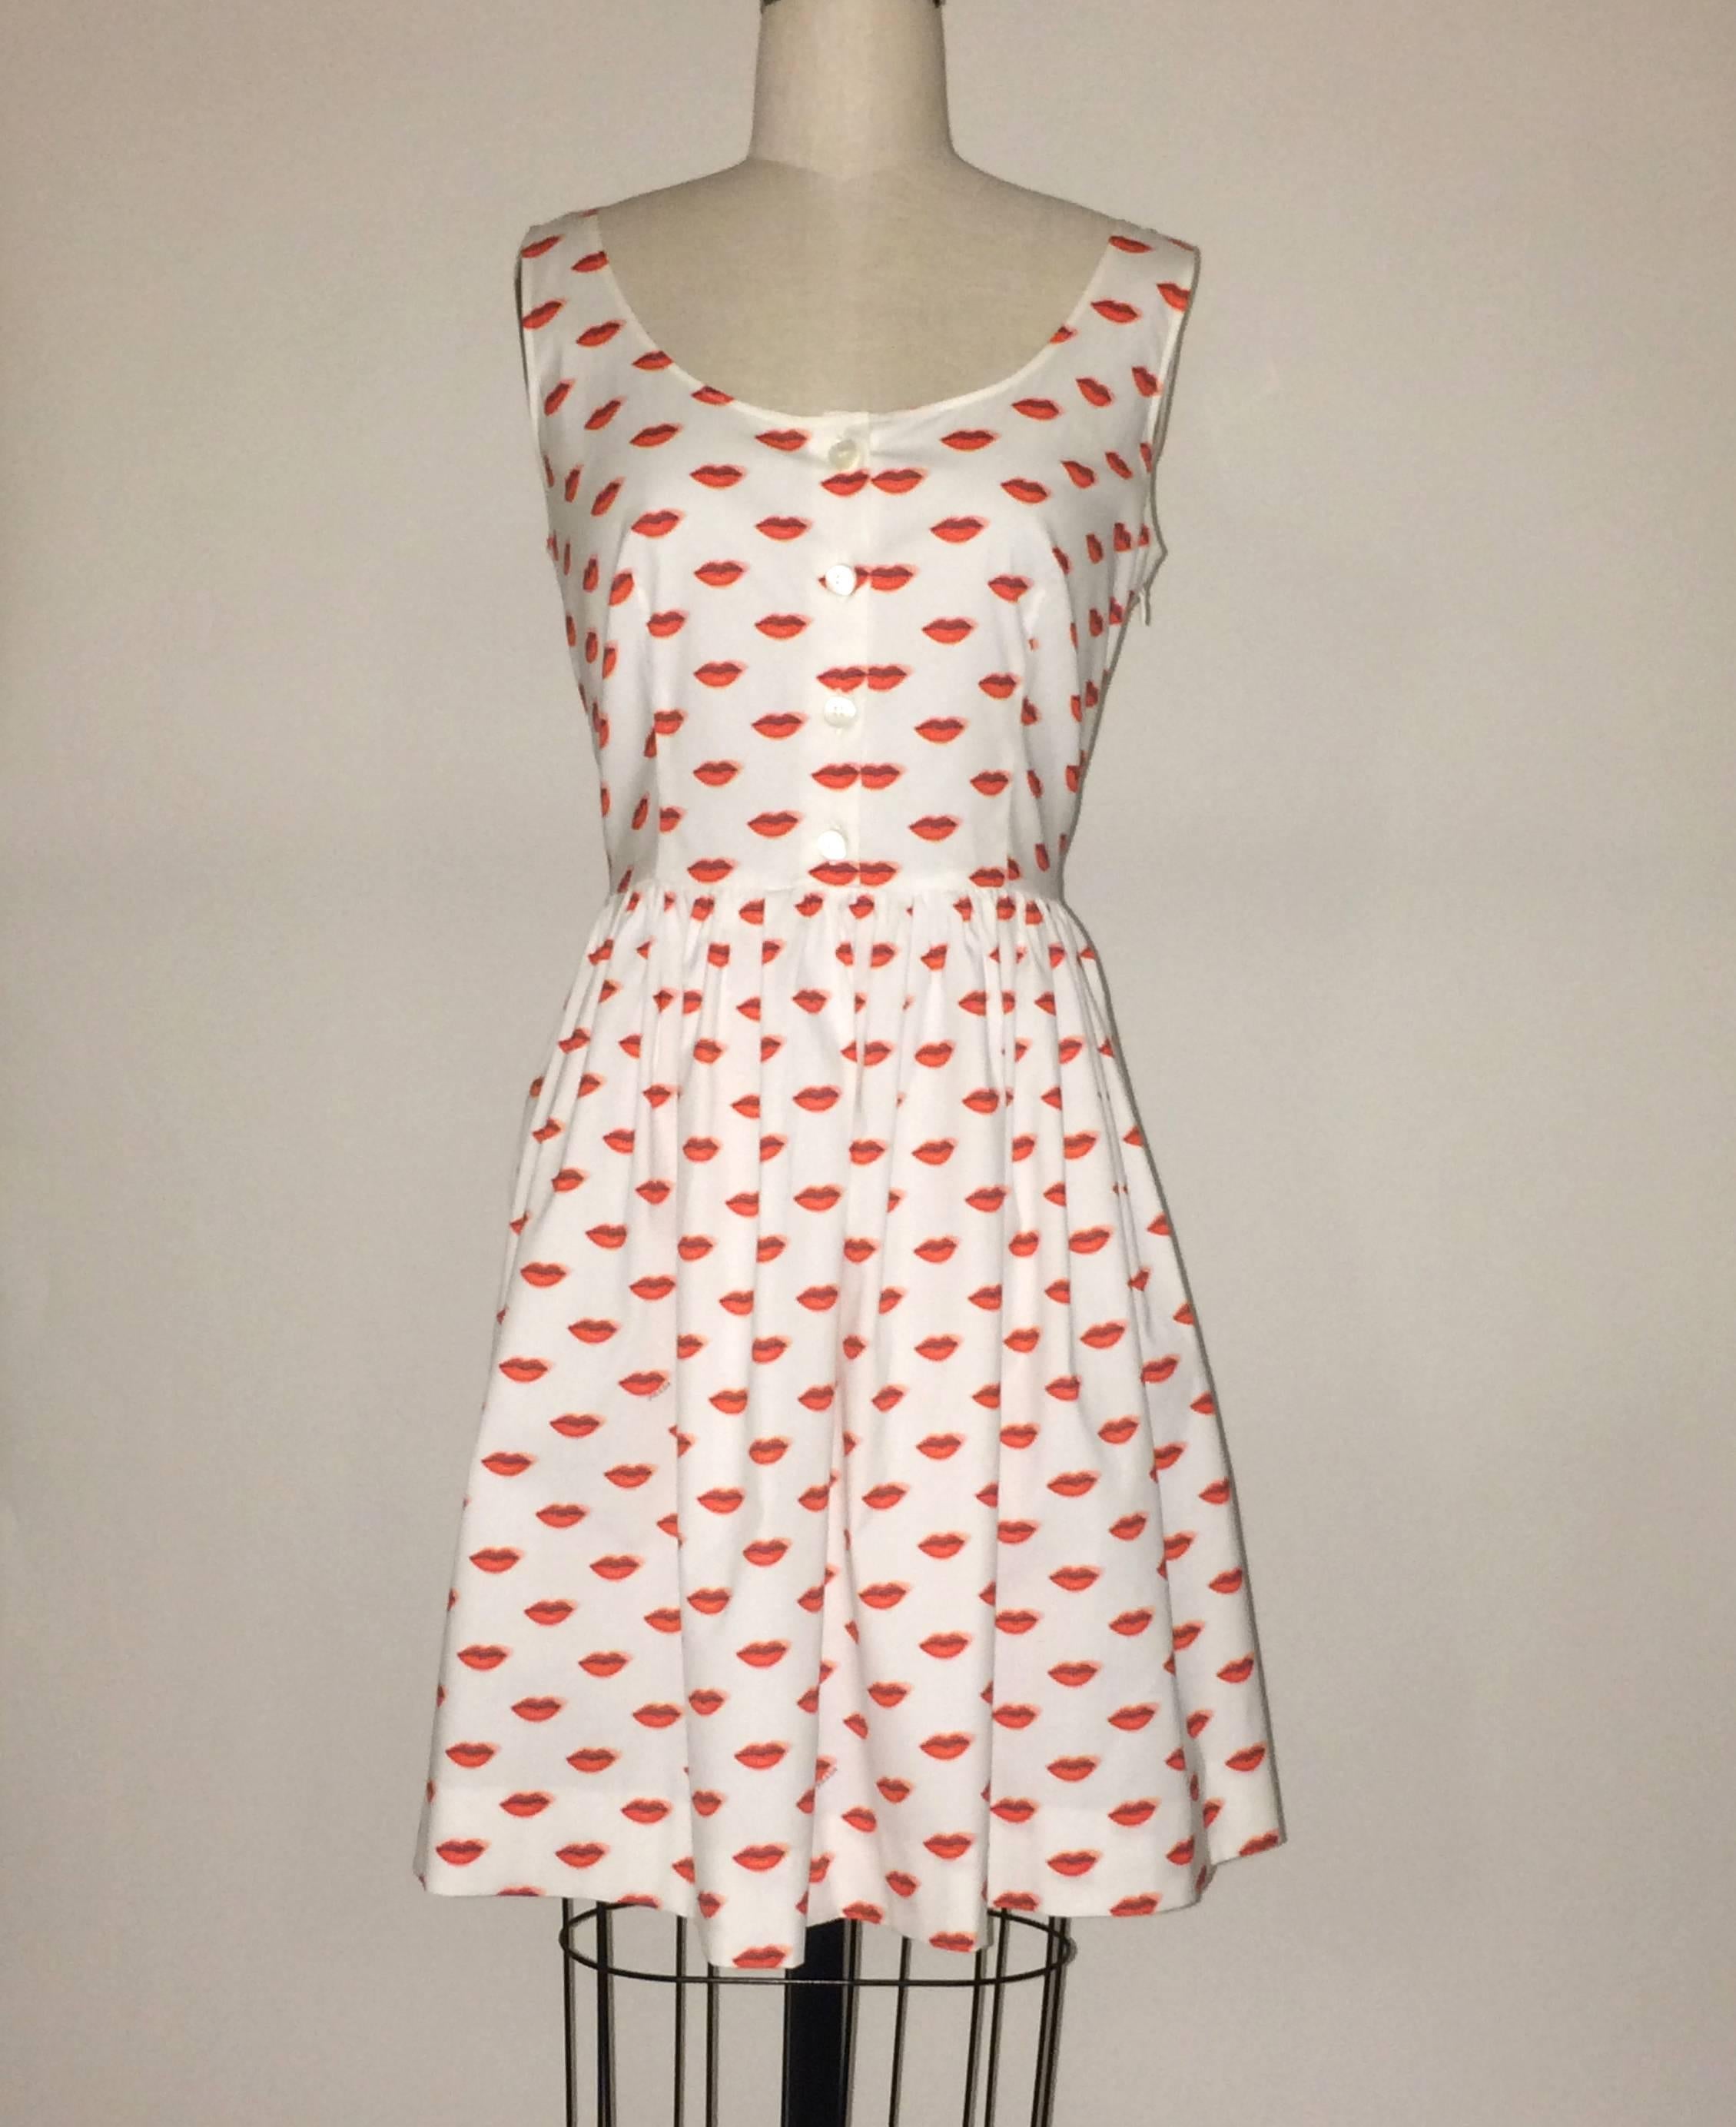 Prada white dress with surrealist red lip print and Prada signature sprinkled throughout. Four working buttons up front bodice. Side zip and hook and eye.

96% cotton, 4% other.

Made in Romania.

Size IT 42, approximate US 6.
Bust 34